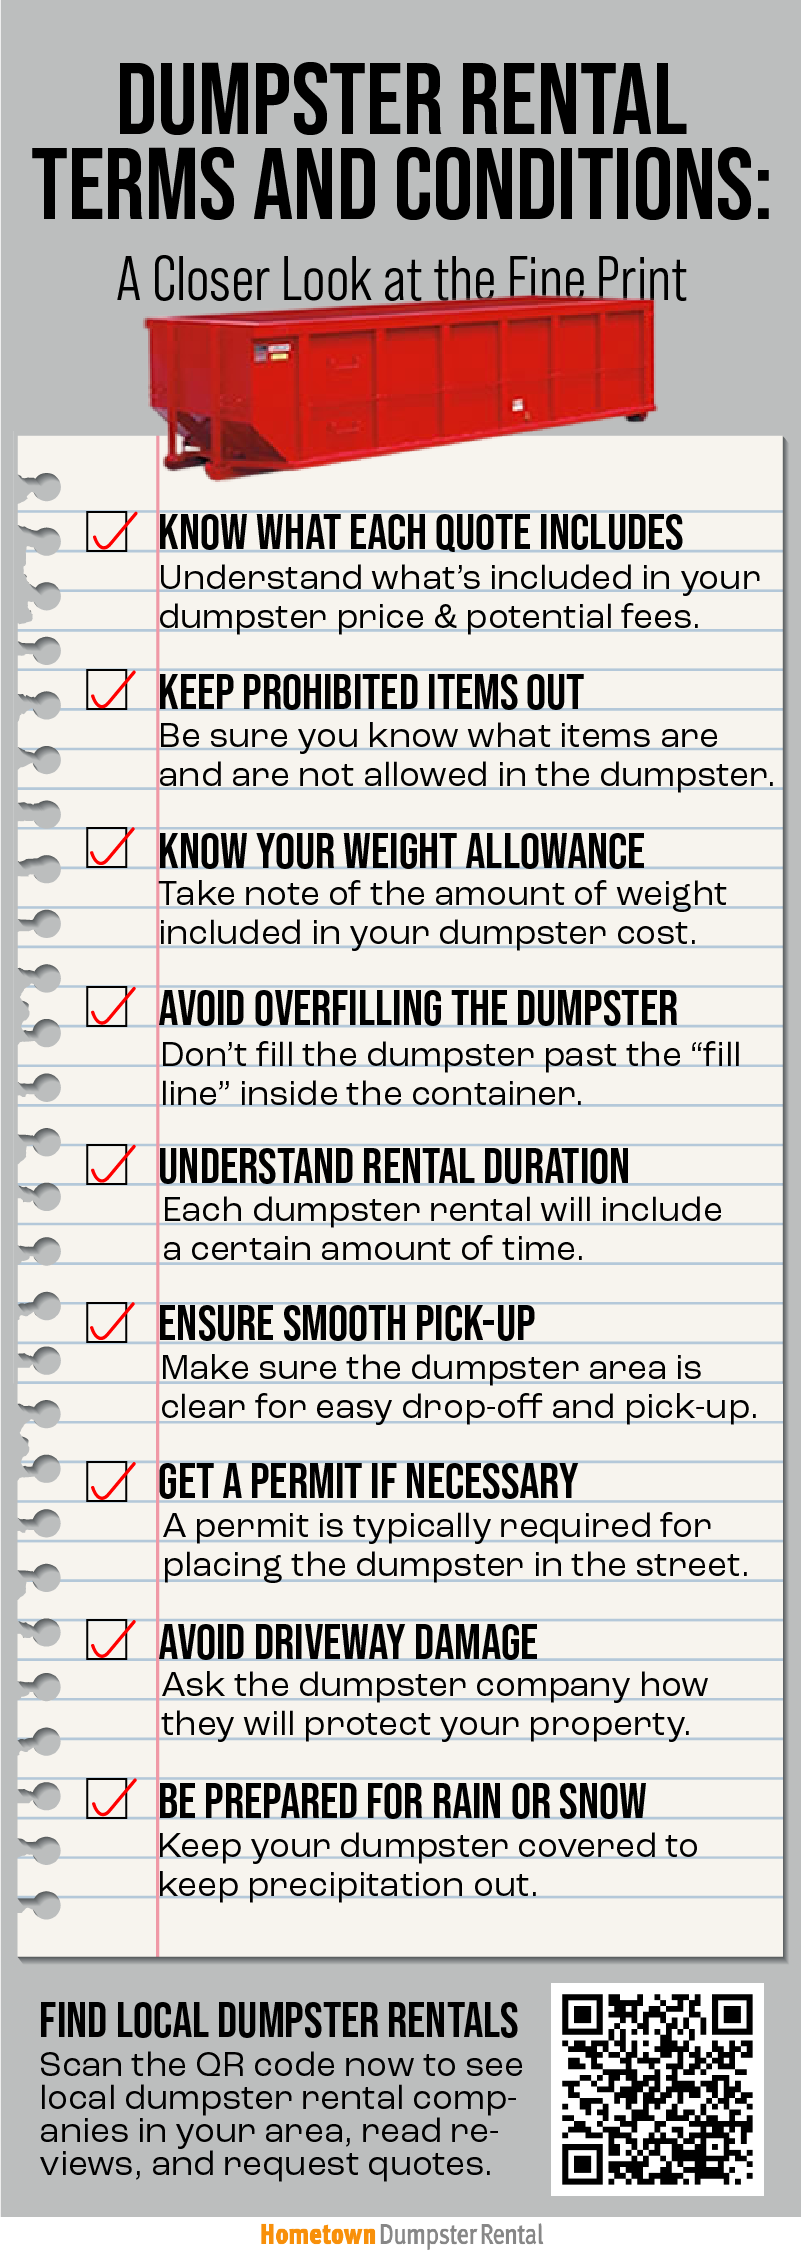 Dumpster Rental Terms and Conditions: A Closer Look at the Fine Print